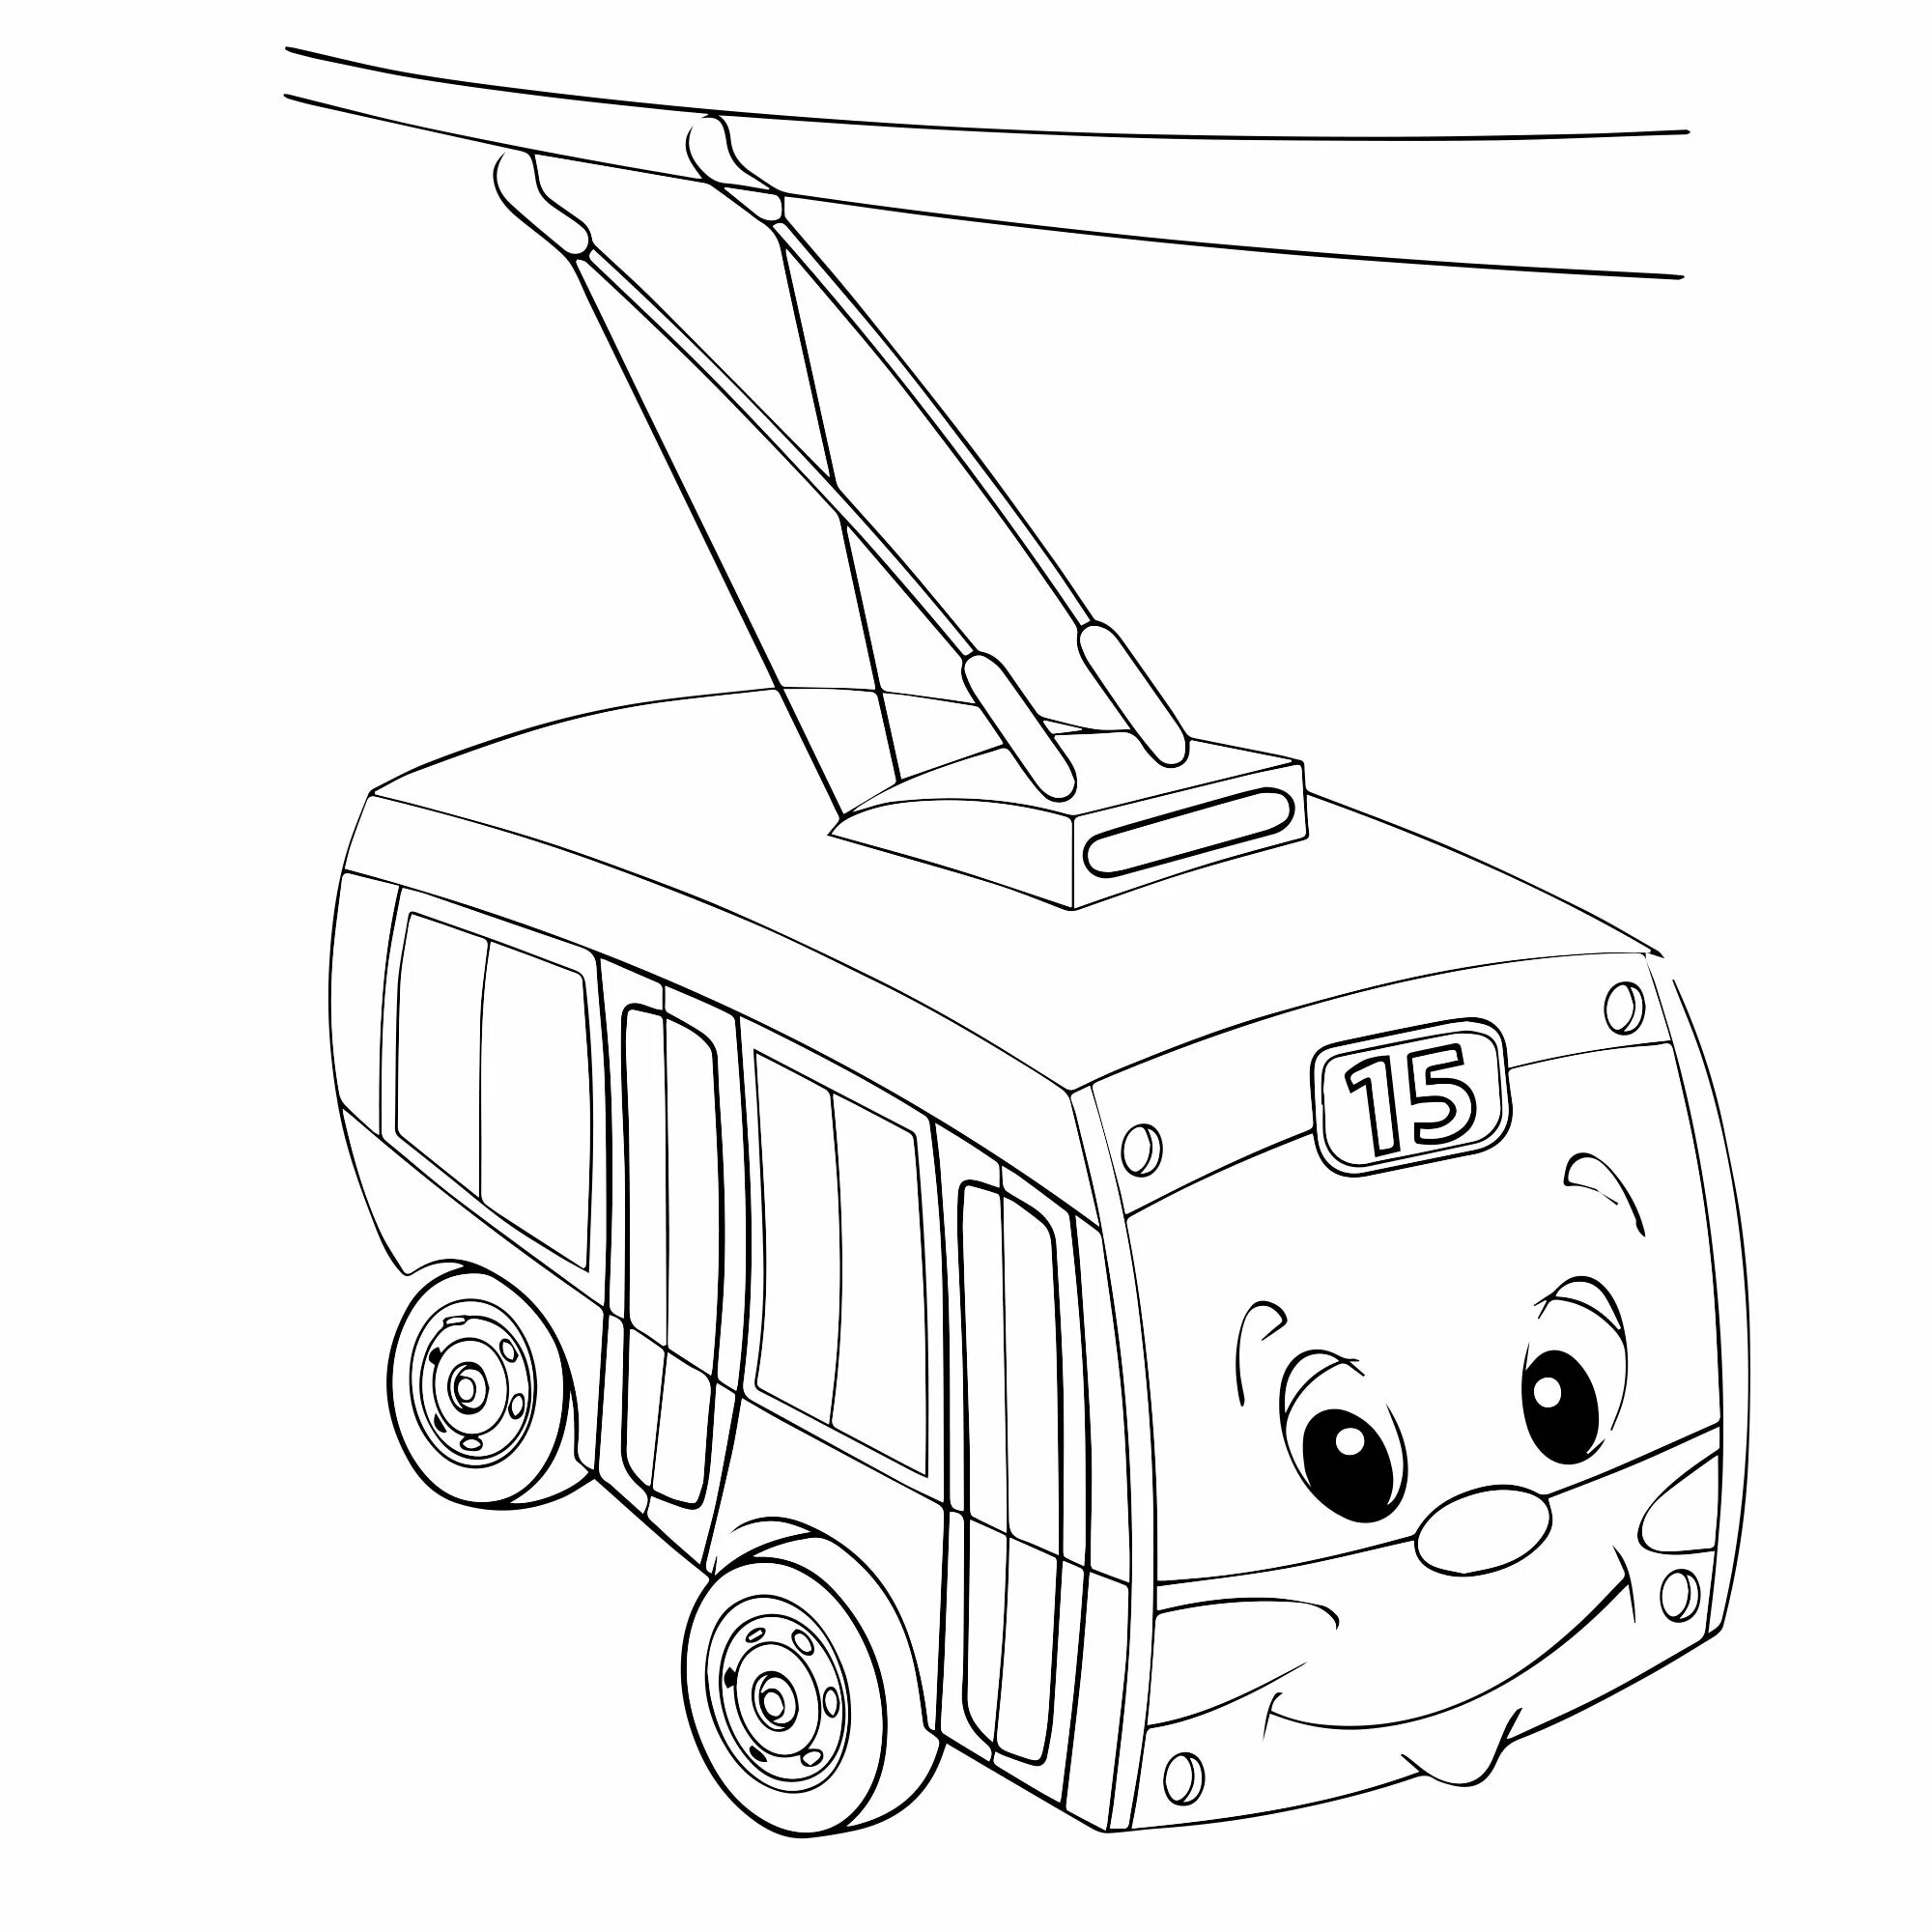 Coloring book glowing trolleybus for students